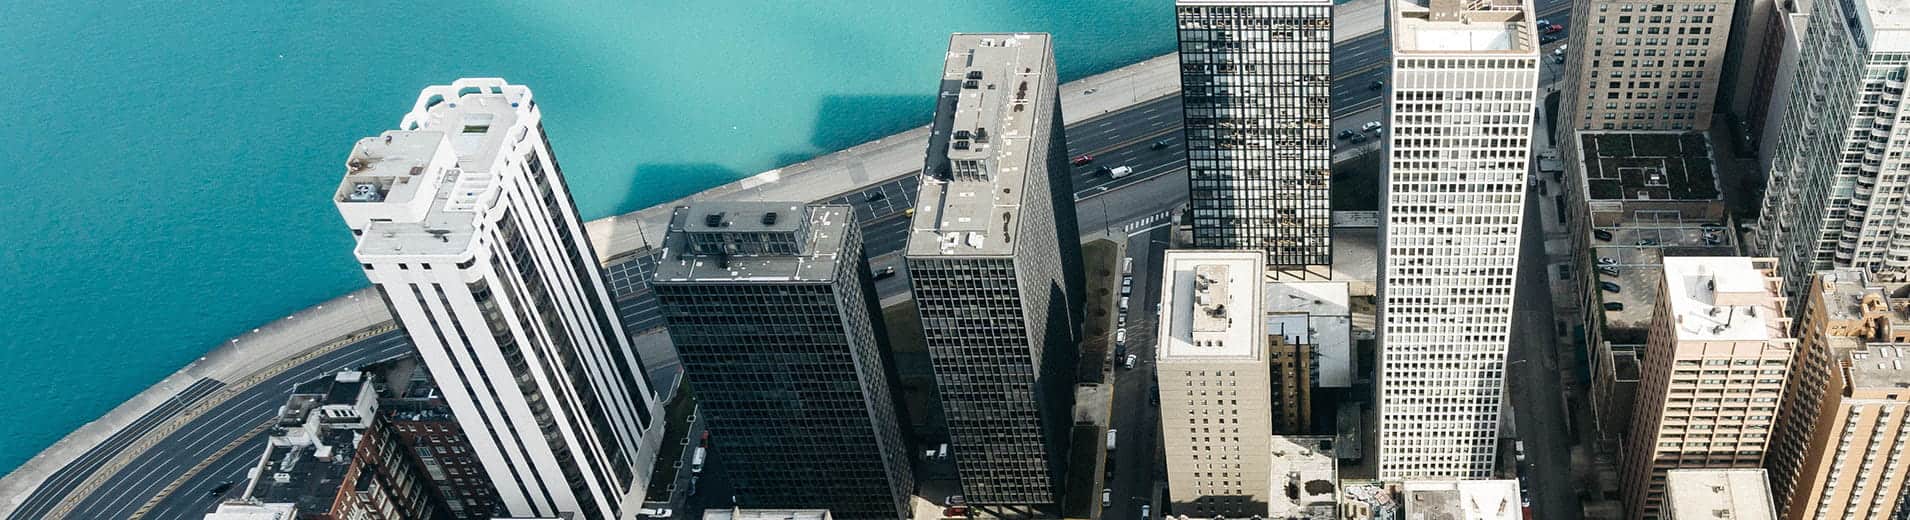 Aerial_view_of_Chicago_P_0060